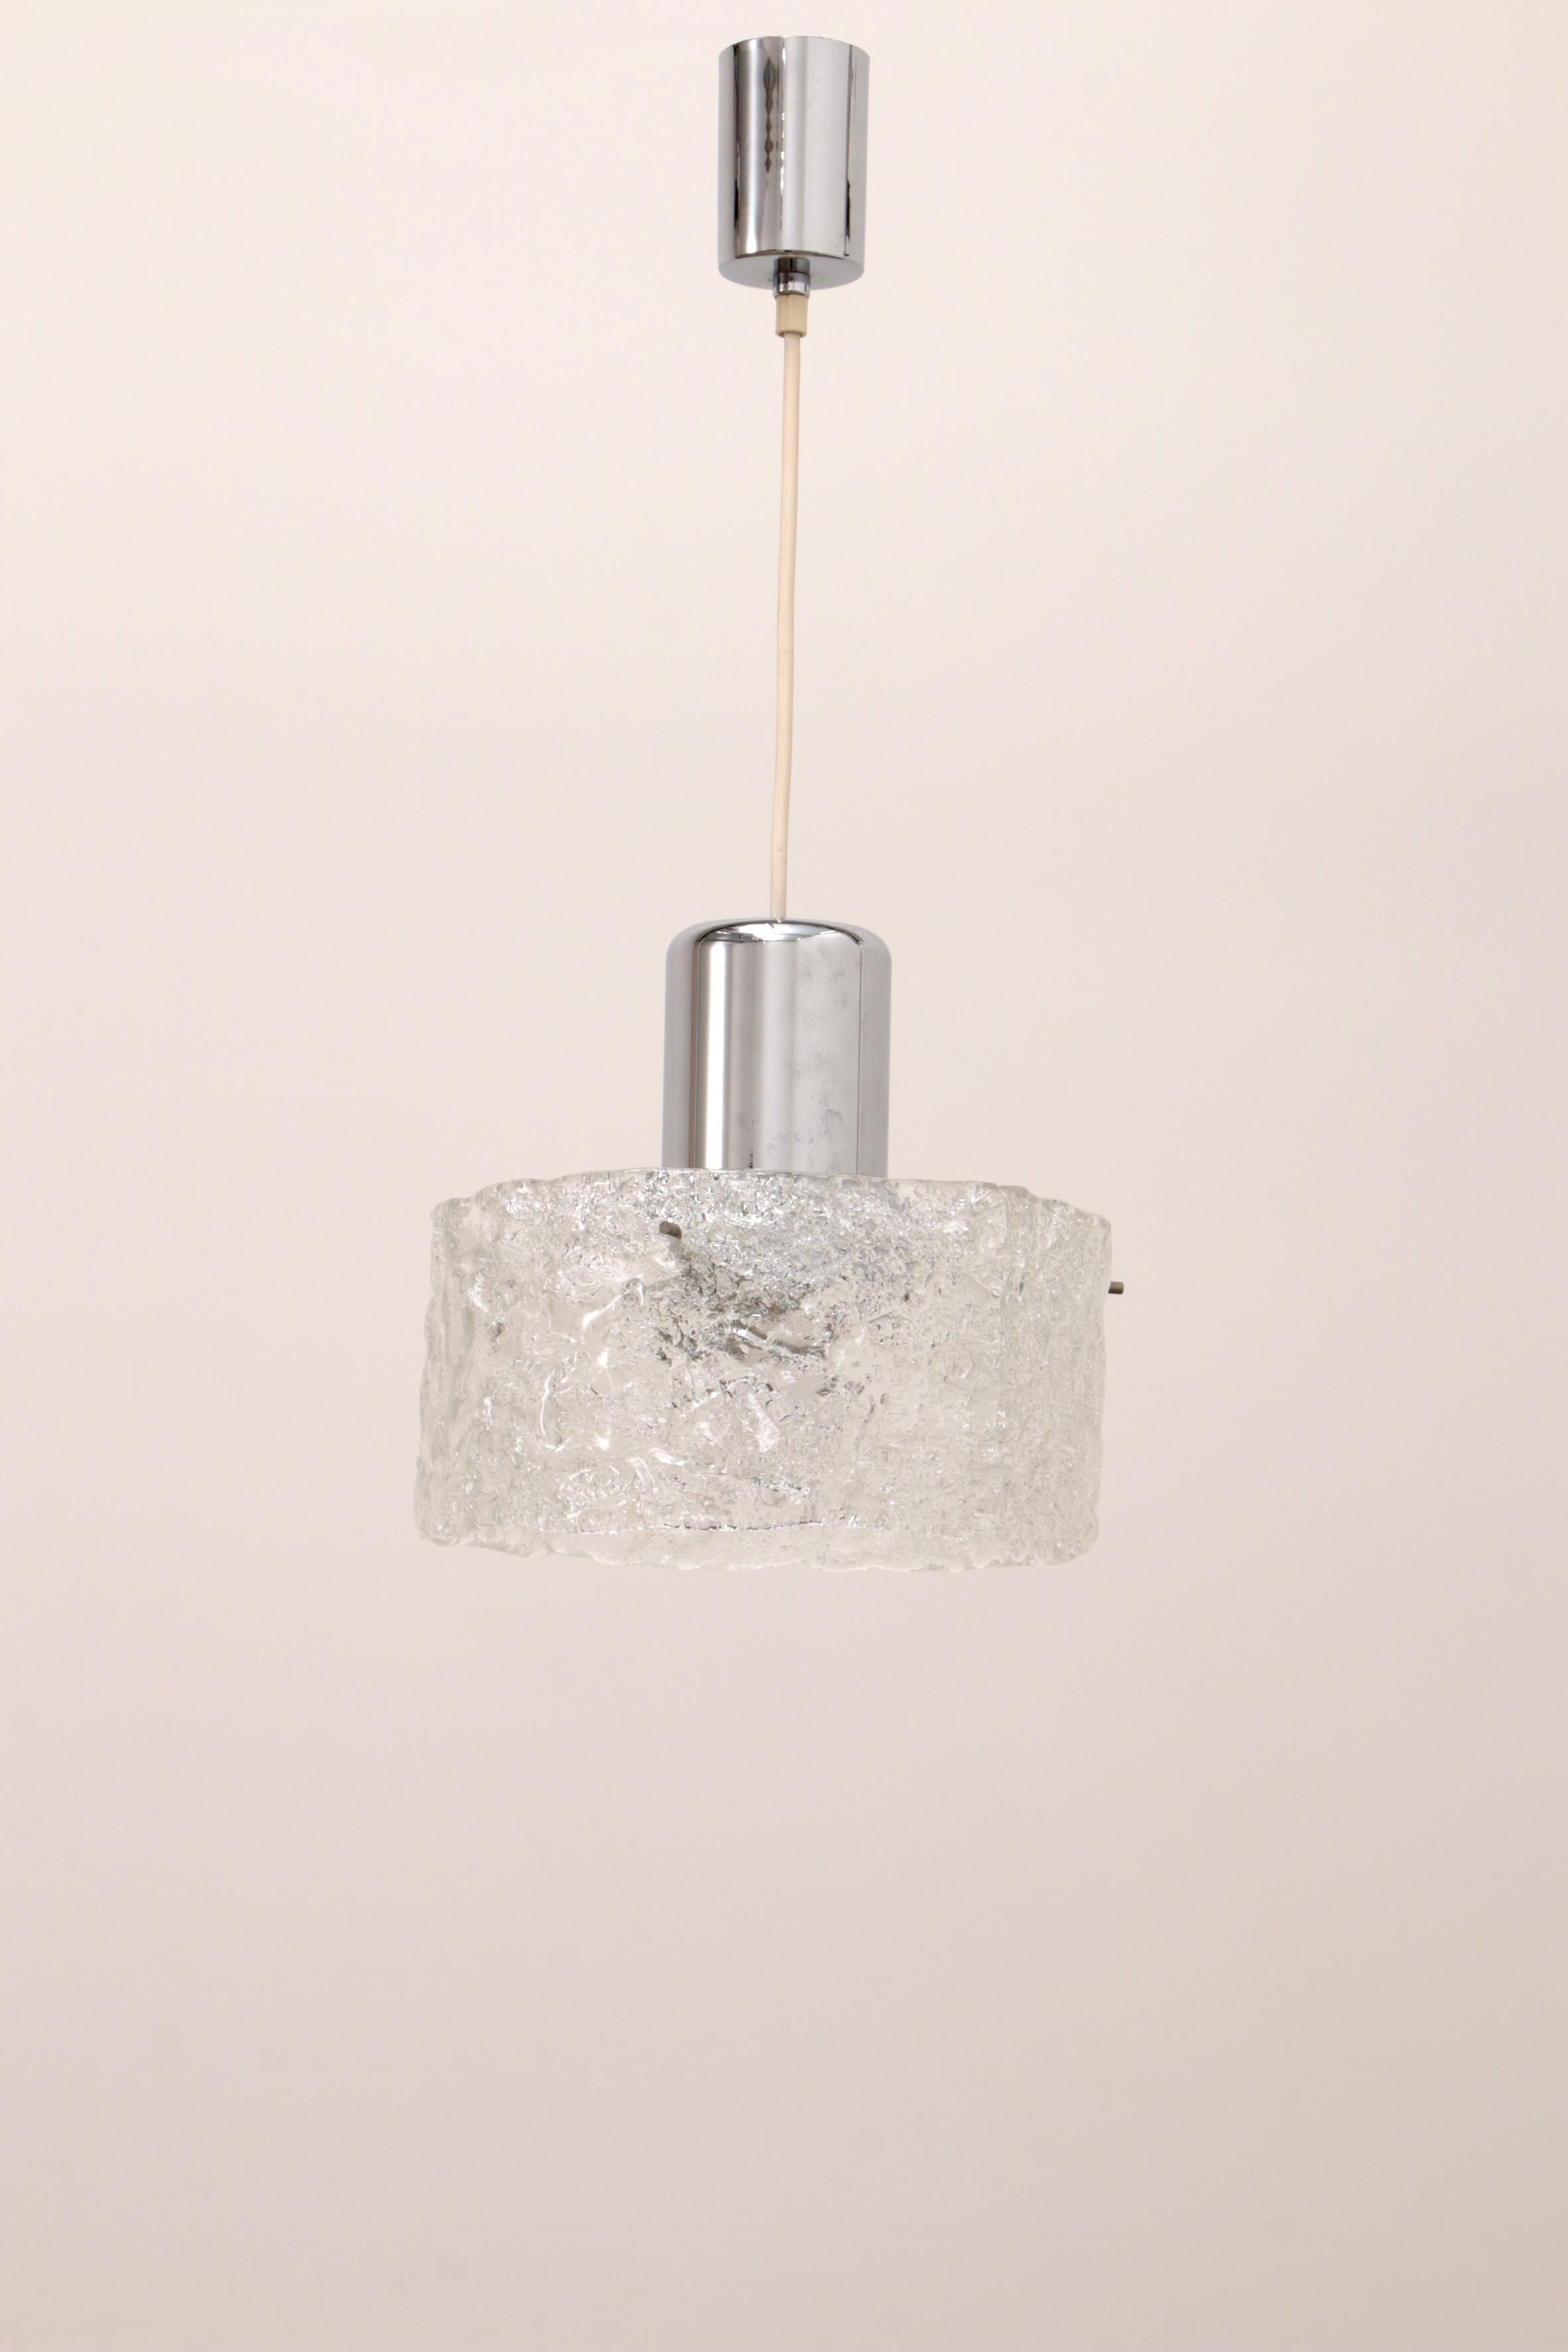 
Very rare ice glass lamp produced by Egon Hillebrand in Germany in the late 1960s. The pendant lamp consists of a large ring of ice glass, which is held by an elaborate chrome-plated suspension. The glass shade is attached to the suspension with